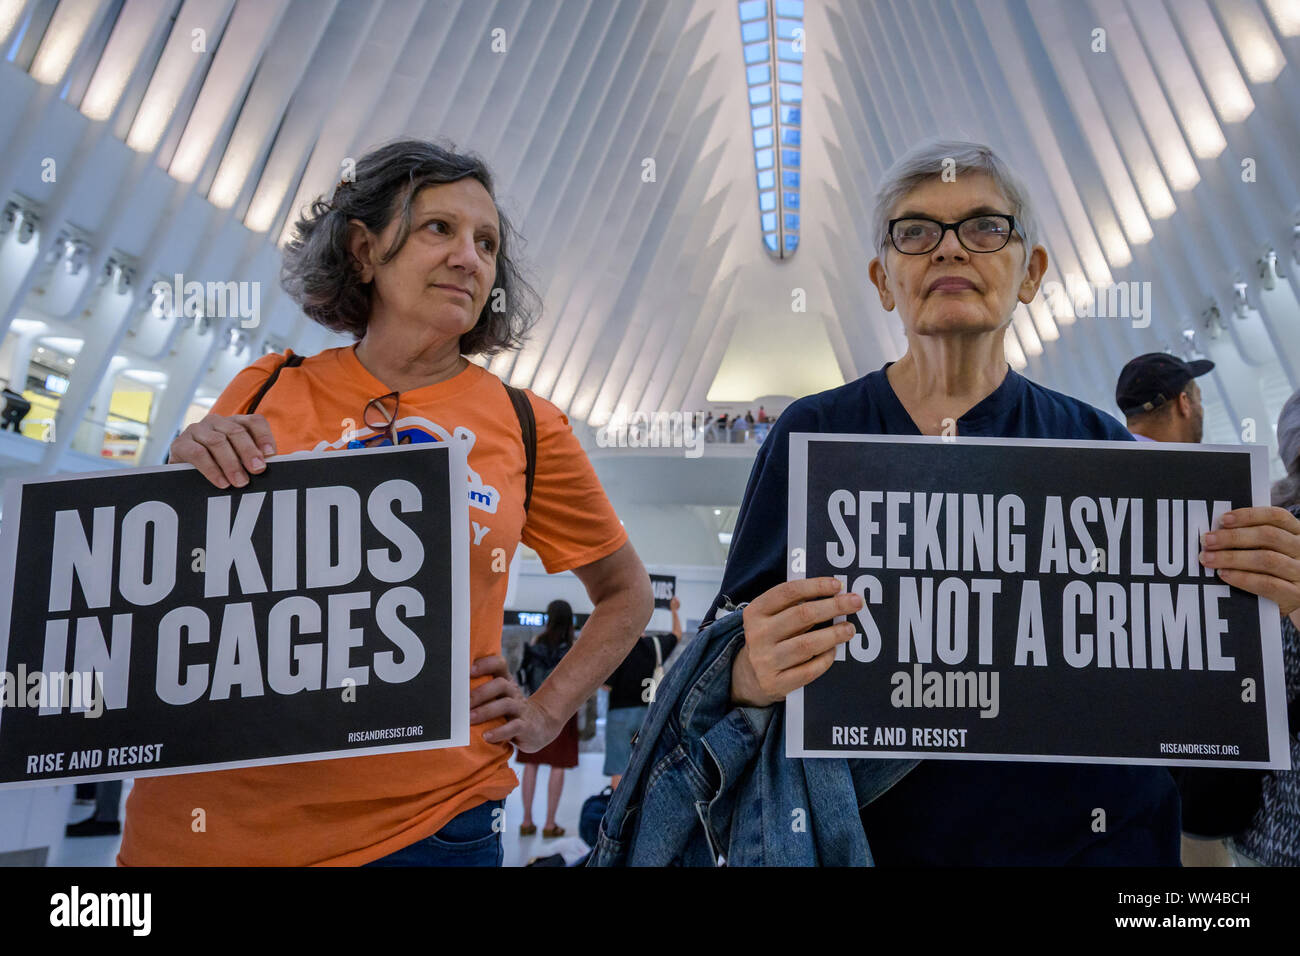 New York, USA. 12th Sep, 2019. Members of the activist group Resist gathered a silent protest inside The Oculus on September 12, 2019 holding NO RAIDS/CLOSE THE CAMPS/ABOLISH ICE banners, photographs of the children who have died in ICE custody, and photographs of the detention camps to object to Border Patrol and ICE treatment of immigrants, refugees, and asylum seekers. Credit: Erik McGregor/ZUMA Wire/Alamy Live News Stock Photo